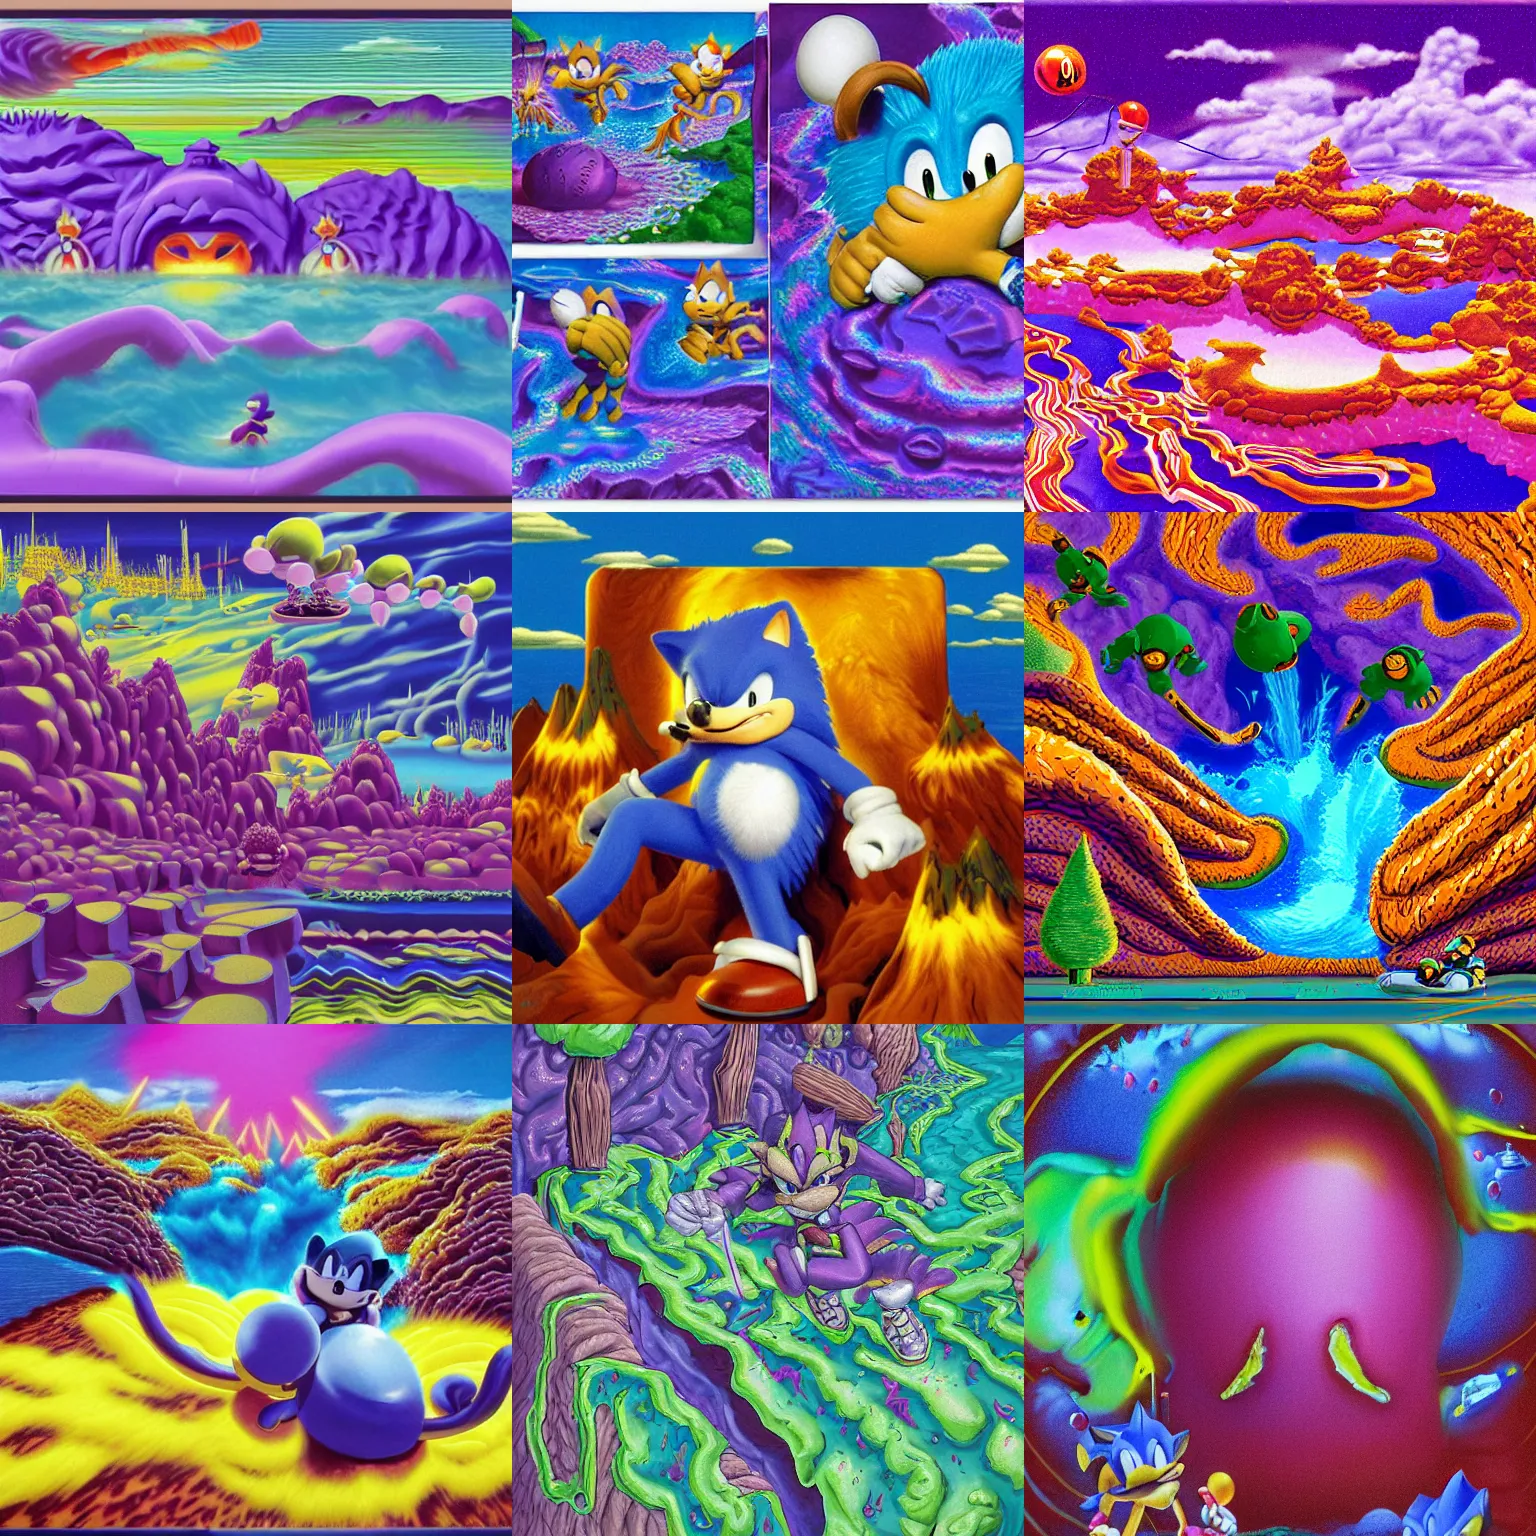 Prompt: dreaming of puffy closeup sonic hedgehog portrait colossal claymation scifi matte painting landscape of a surreal lava, retro moulded professional wooden pastels high quality airbrush art tawdry album peaceful of a liquid dissolving airbrush art lsd sonic the hedgehog swimming through cyberspace purple ambiguous checkerboard background 1 9 8 0 s 1 9 8 2 sega genesis video game album cover